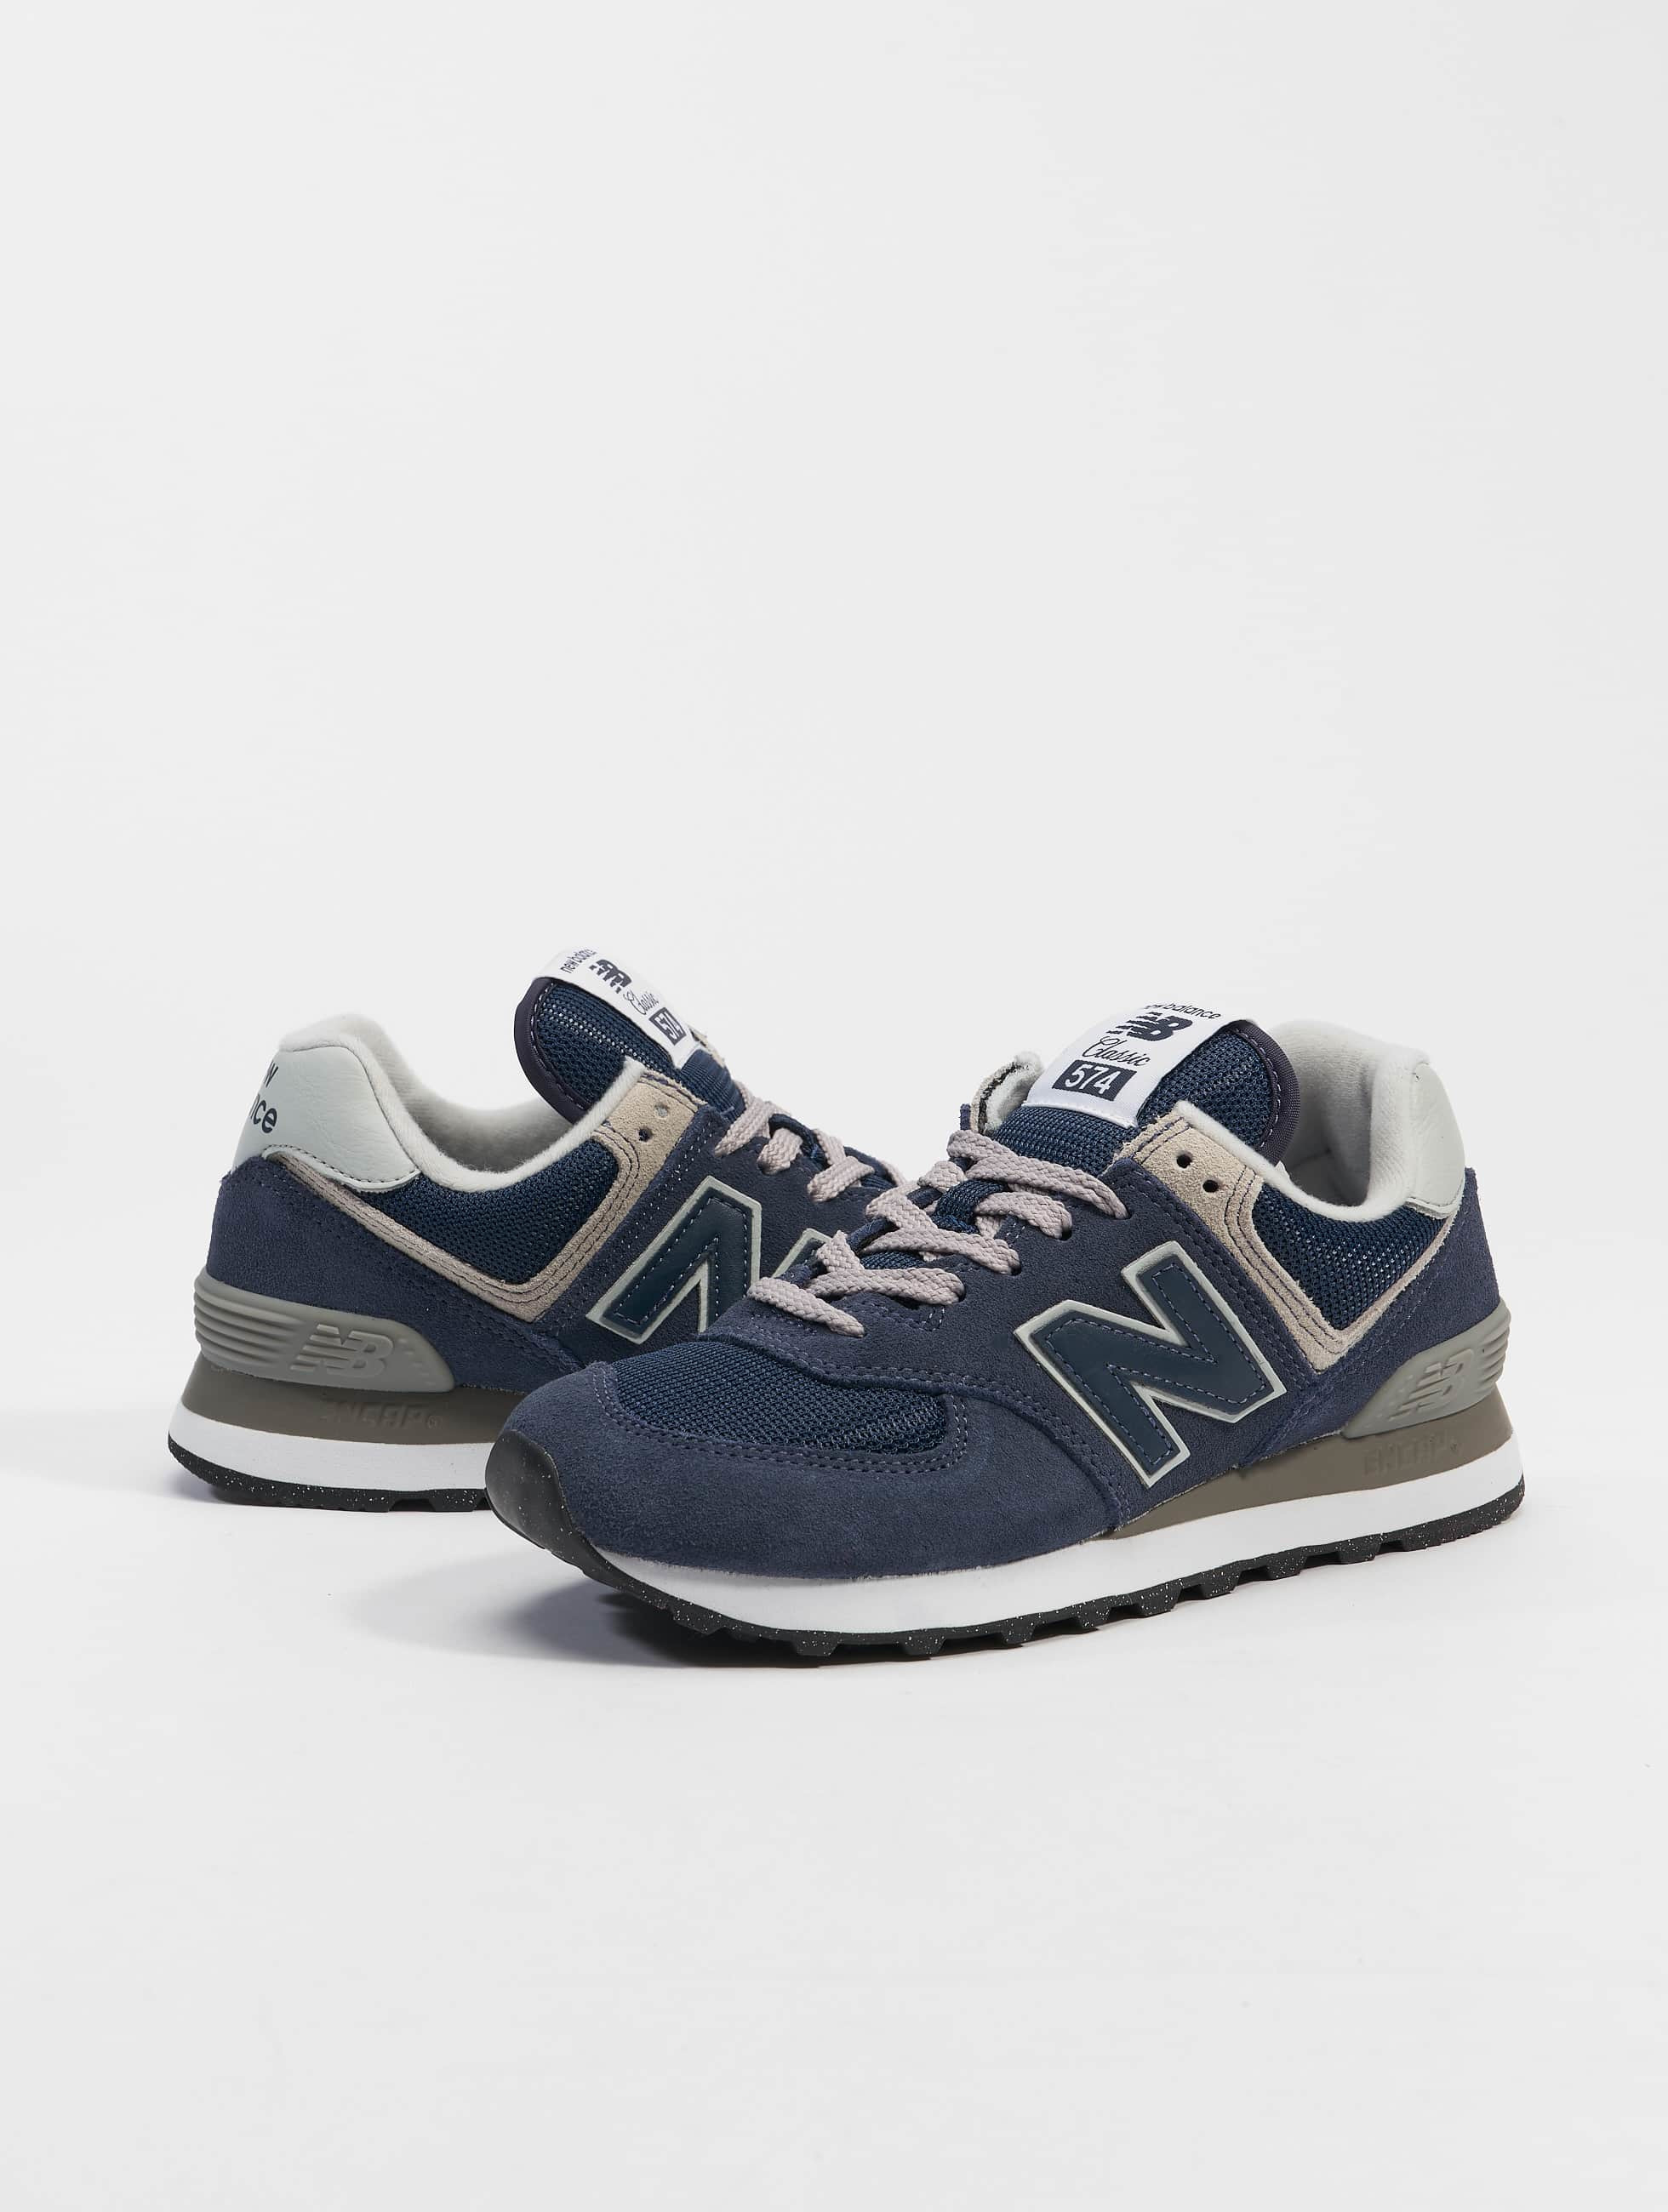 labios whisky crisantemo New Balance Shoe / Sneakers 574 in blue 975946